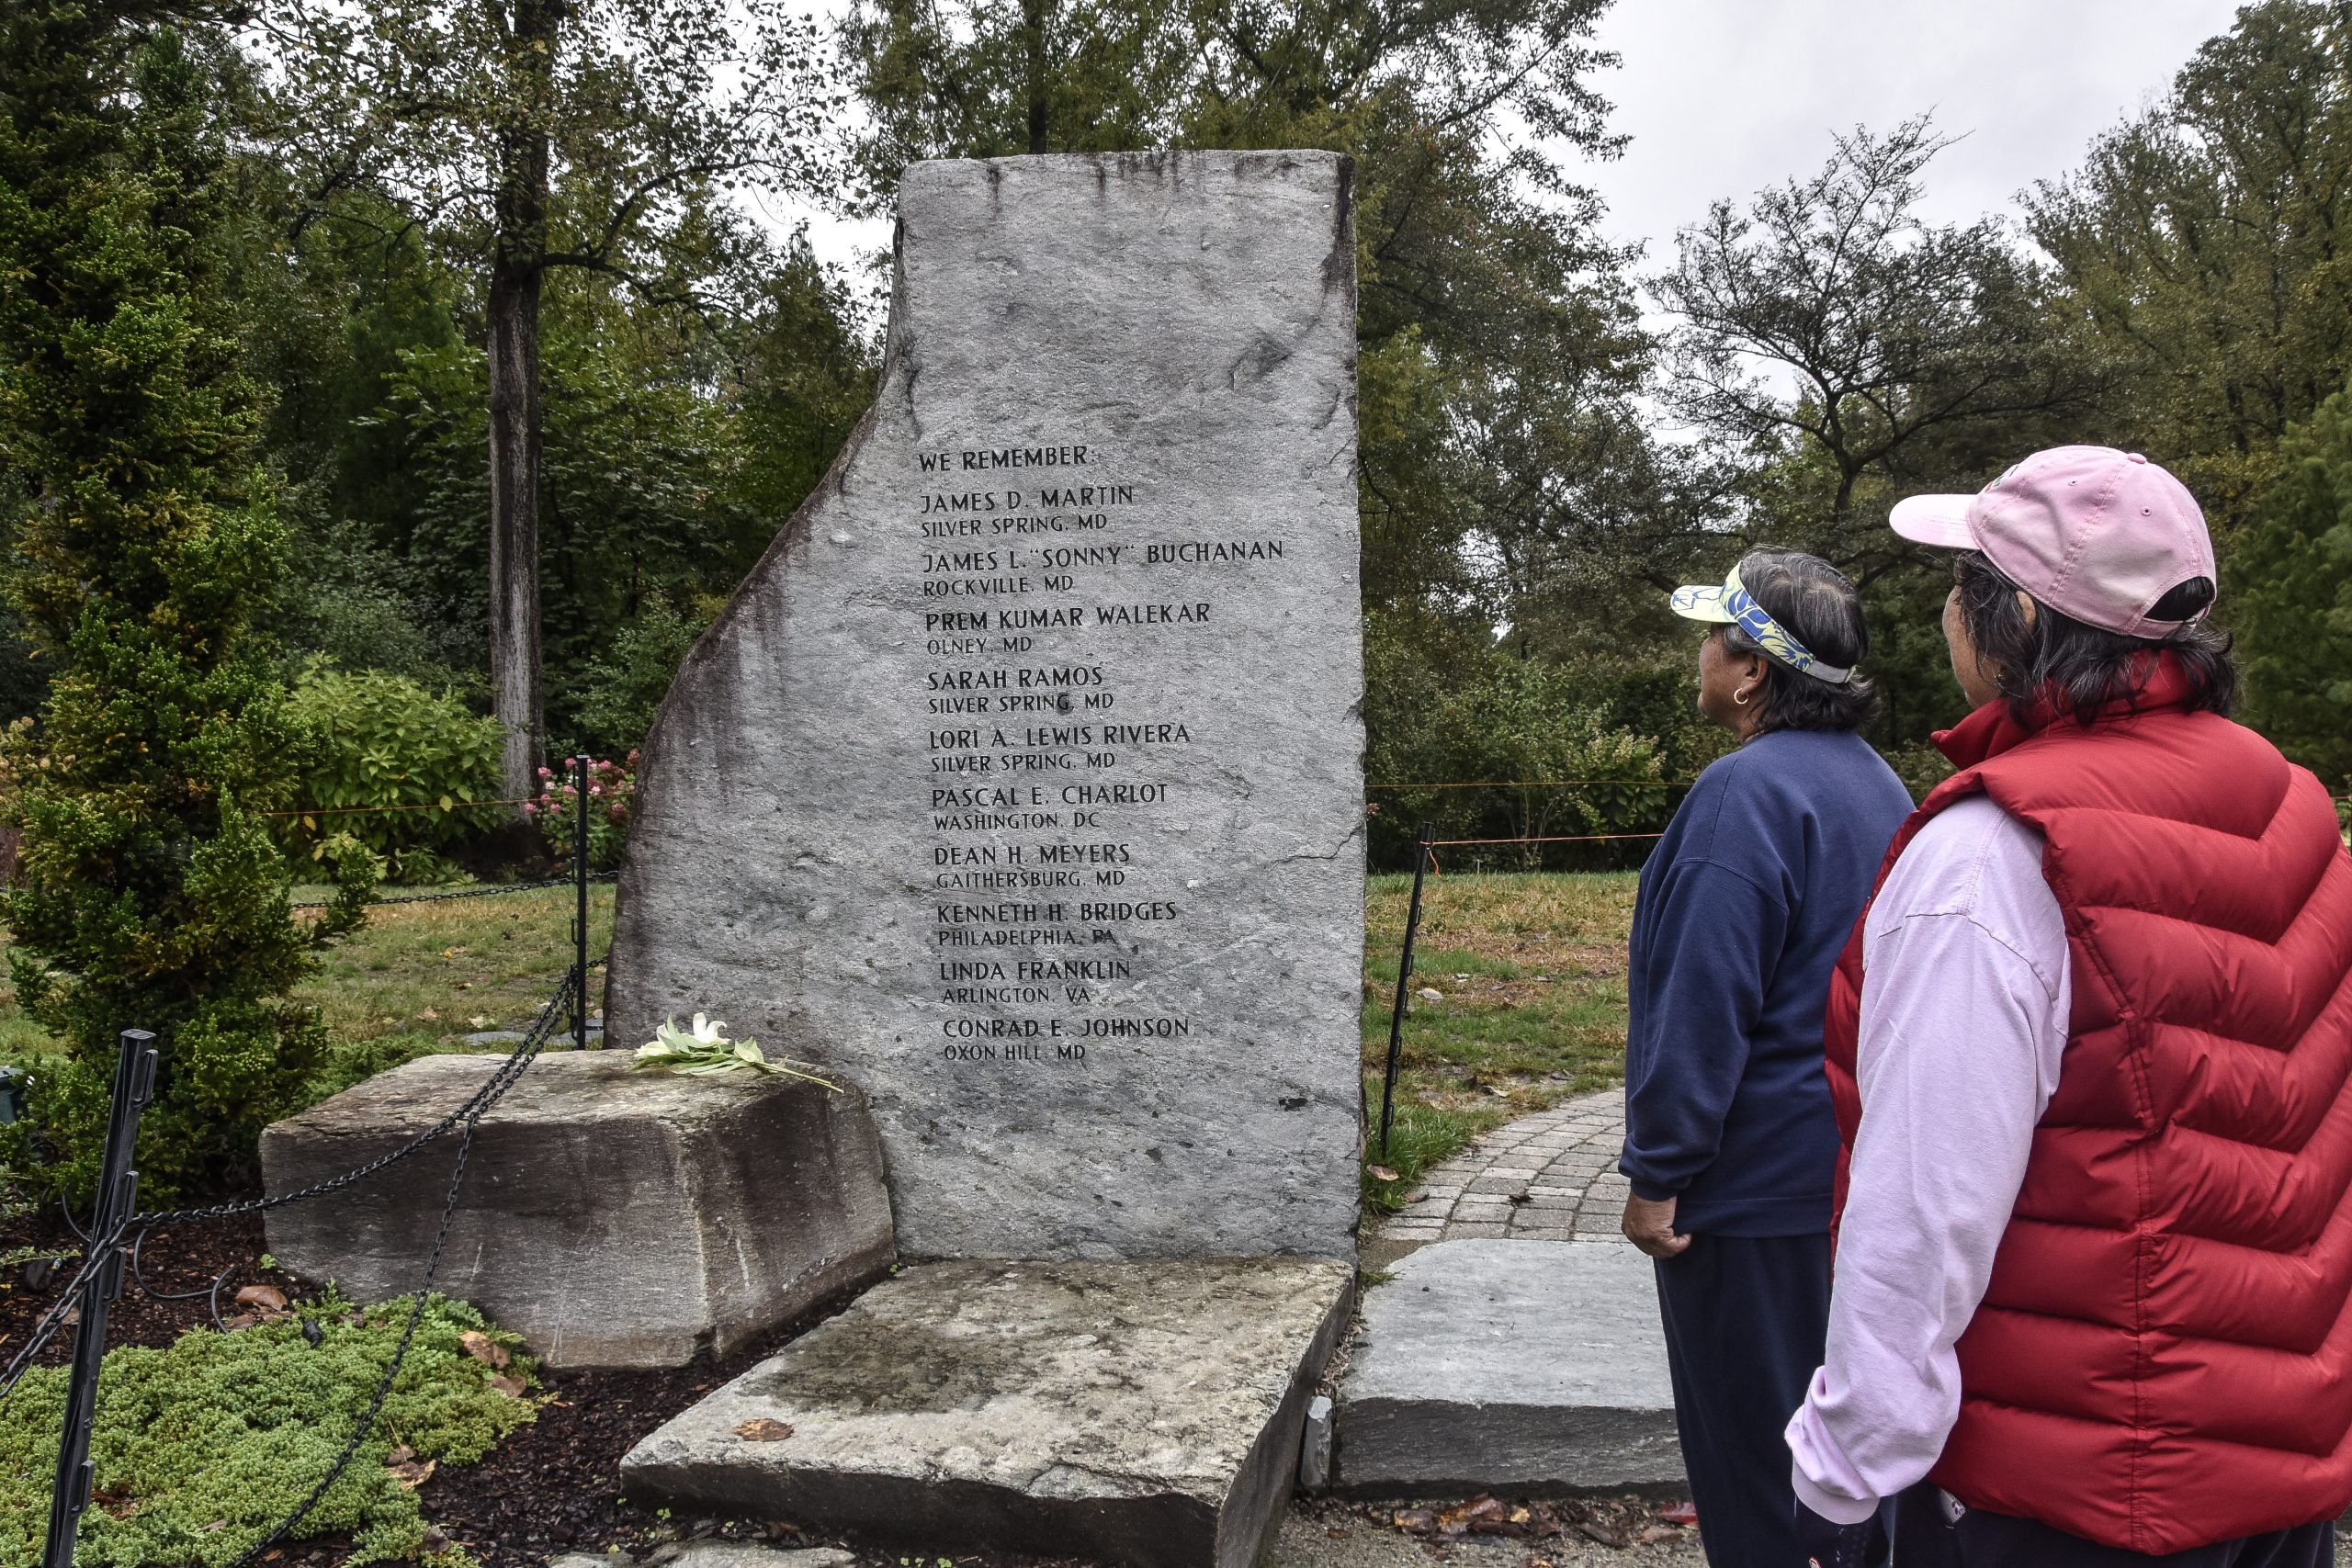 Maryland Memorial for Victims of D.C. Snipers Serves as Epicenter of ‘Reflection’ 